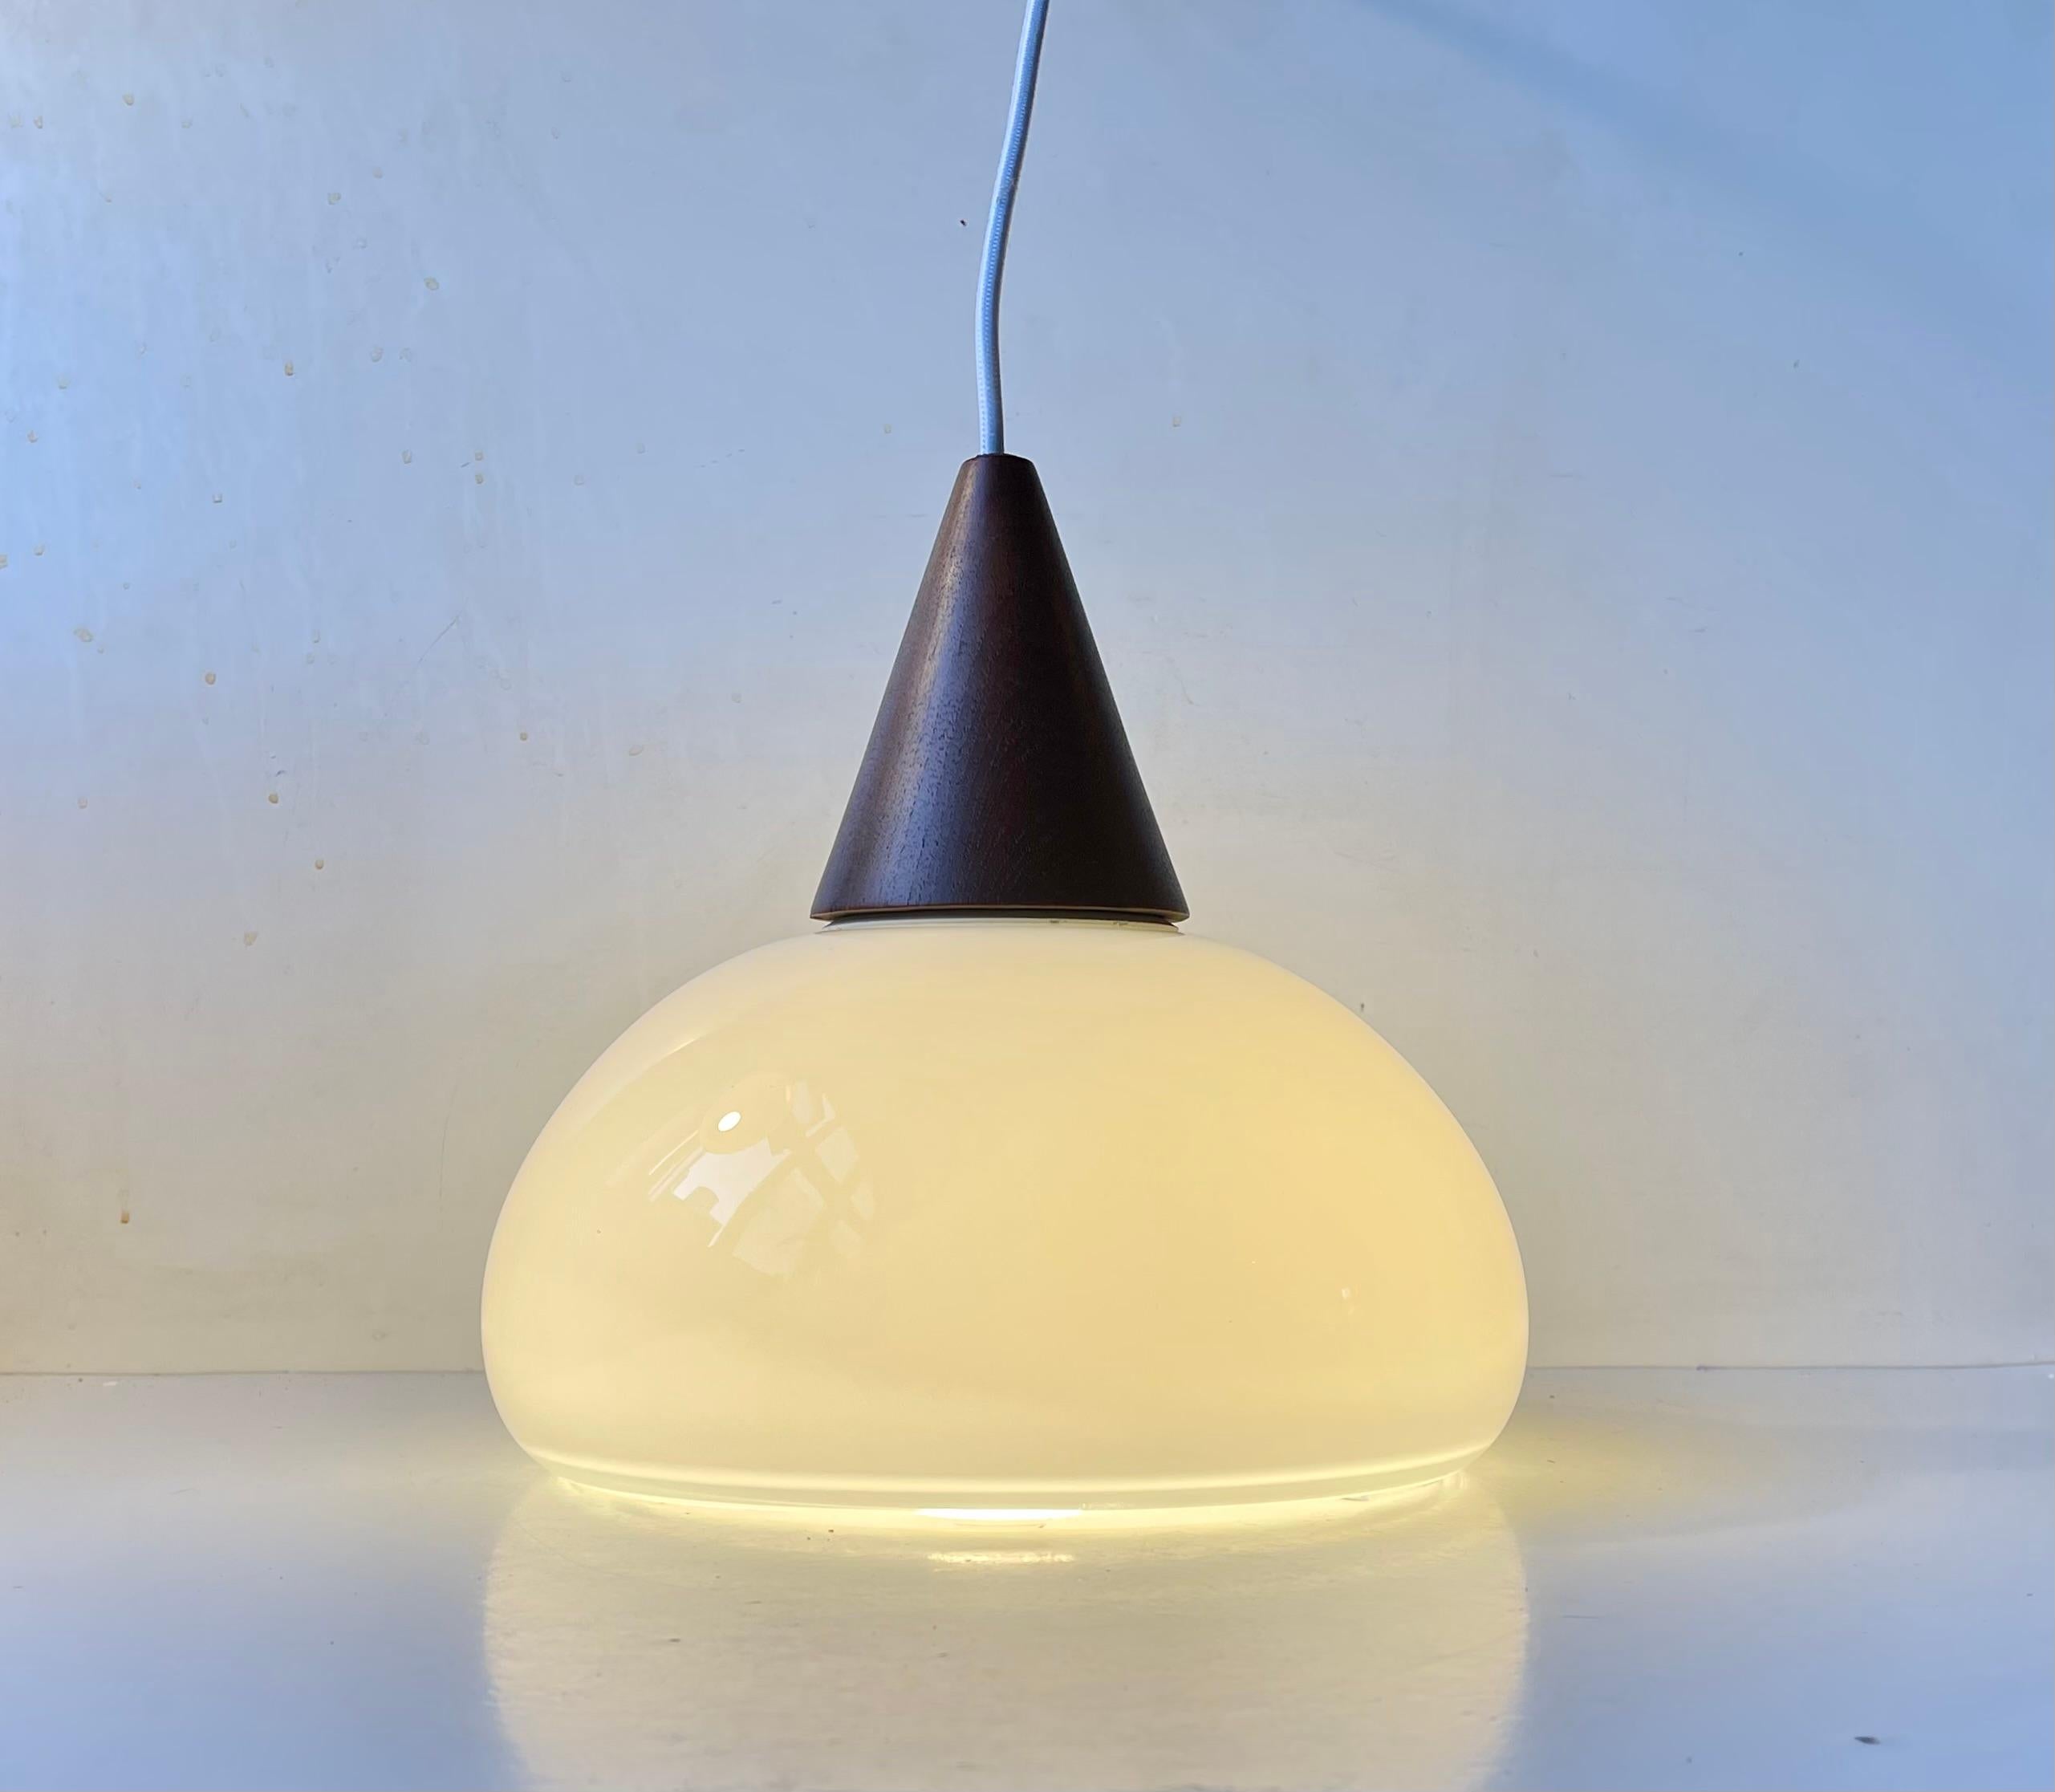 A rare hand-blown cased white opaline glass pendant light designed by Per Lütken and manufactured by Holmegaard in Denmark during the late 1970s or early 80s. It is called Sunset and is characterized by its mushroom shape and reflective bottom edge